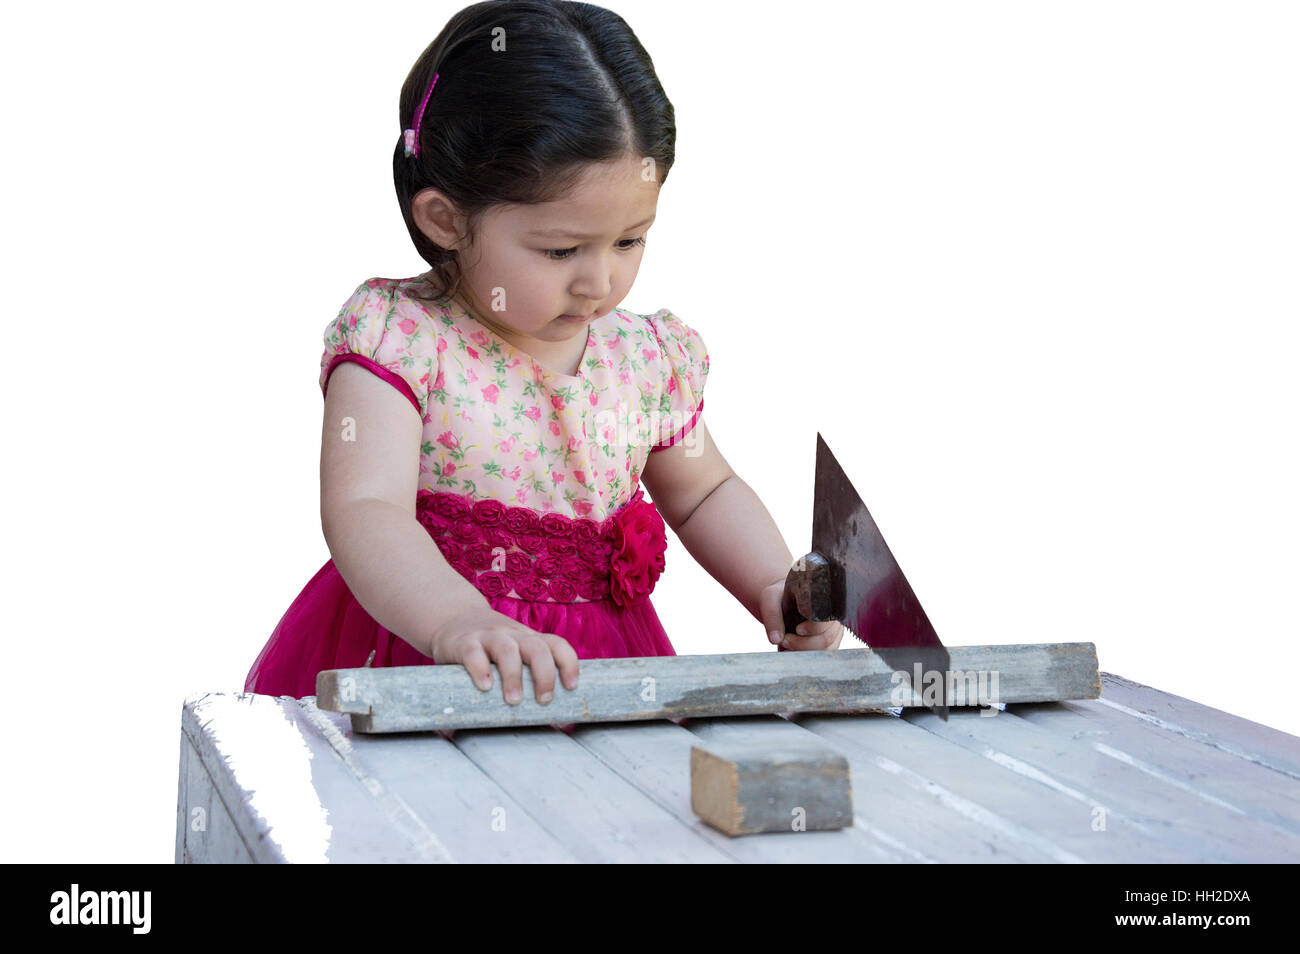 Little girl sawing plank with a handsaw. Isolated on white background. Stock Photo